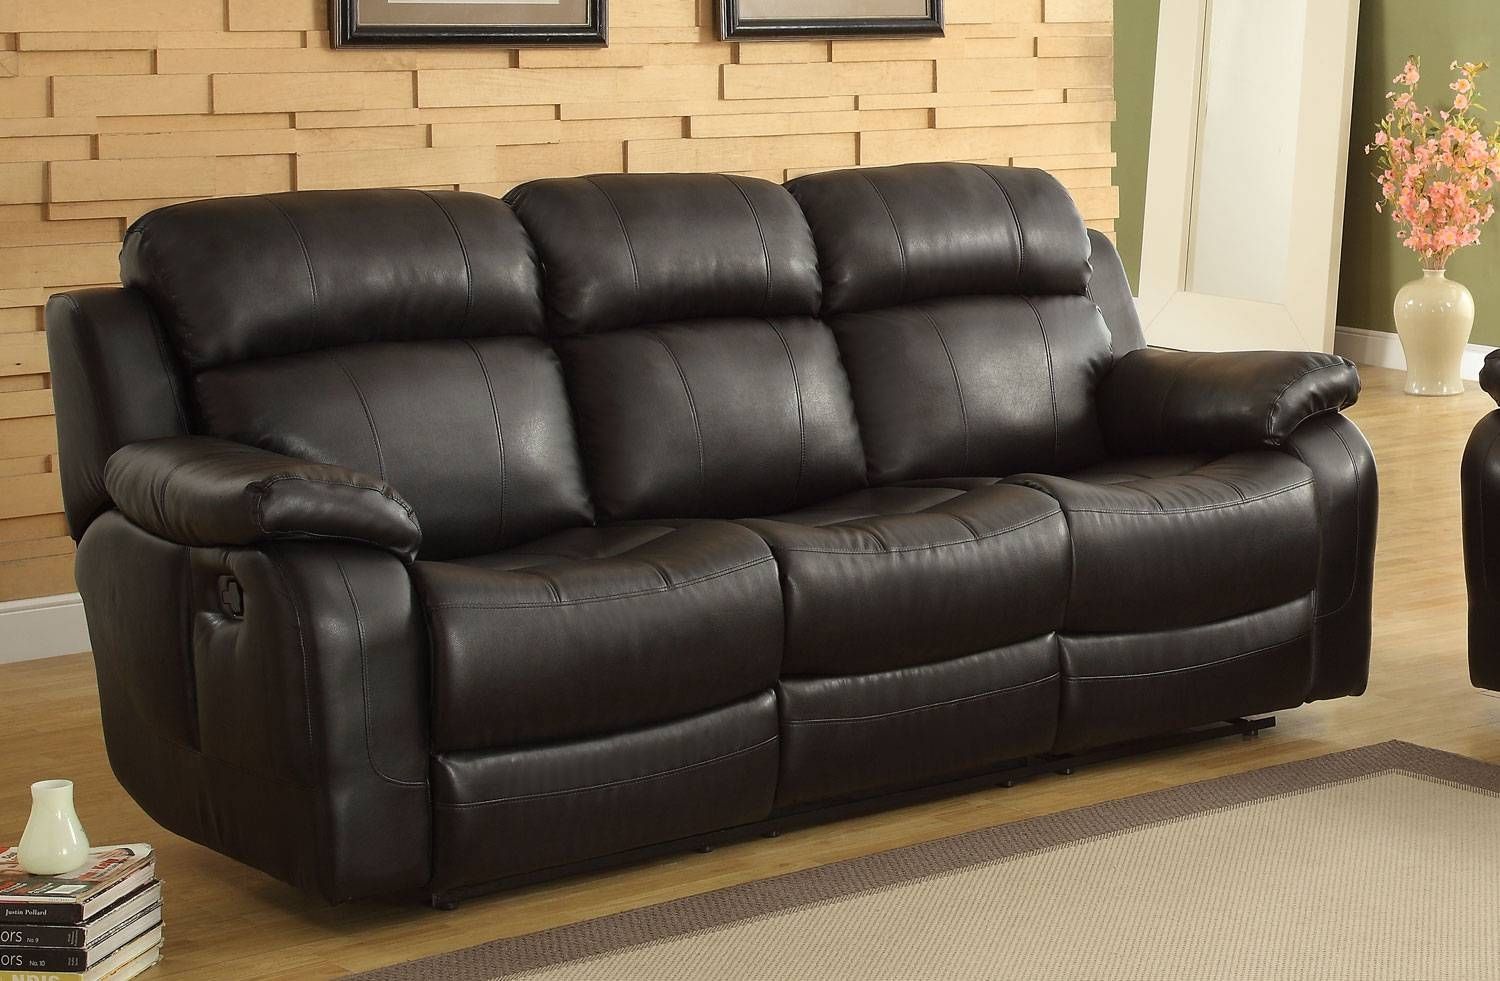 Homelegance Marille Recliner Sofa With Drop Center Cup Holder In Sofas With Cup Holders (View 4 of 15)